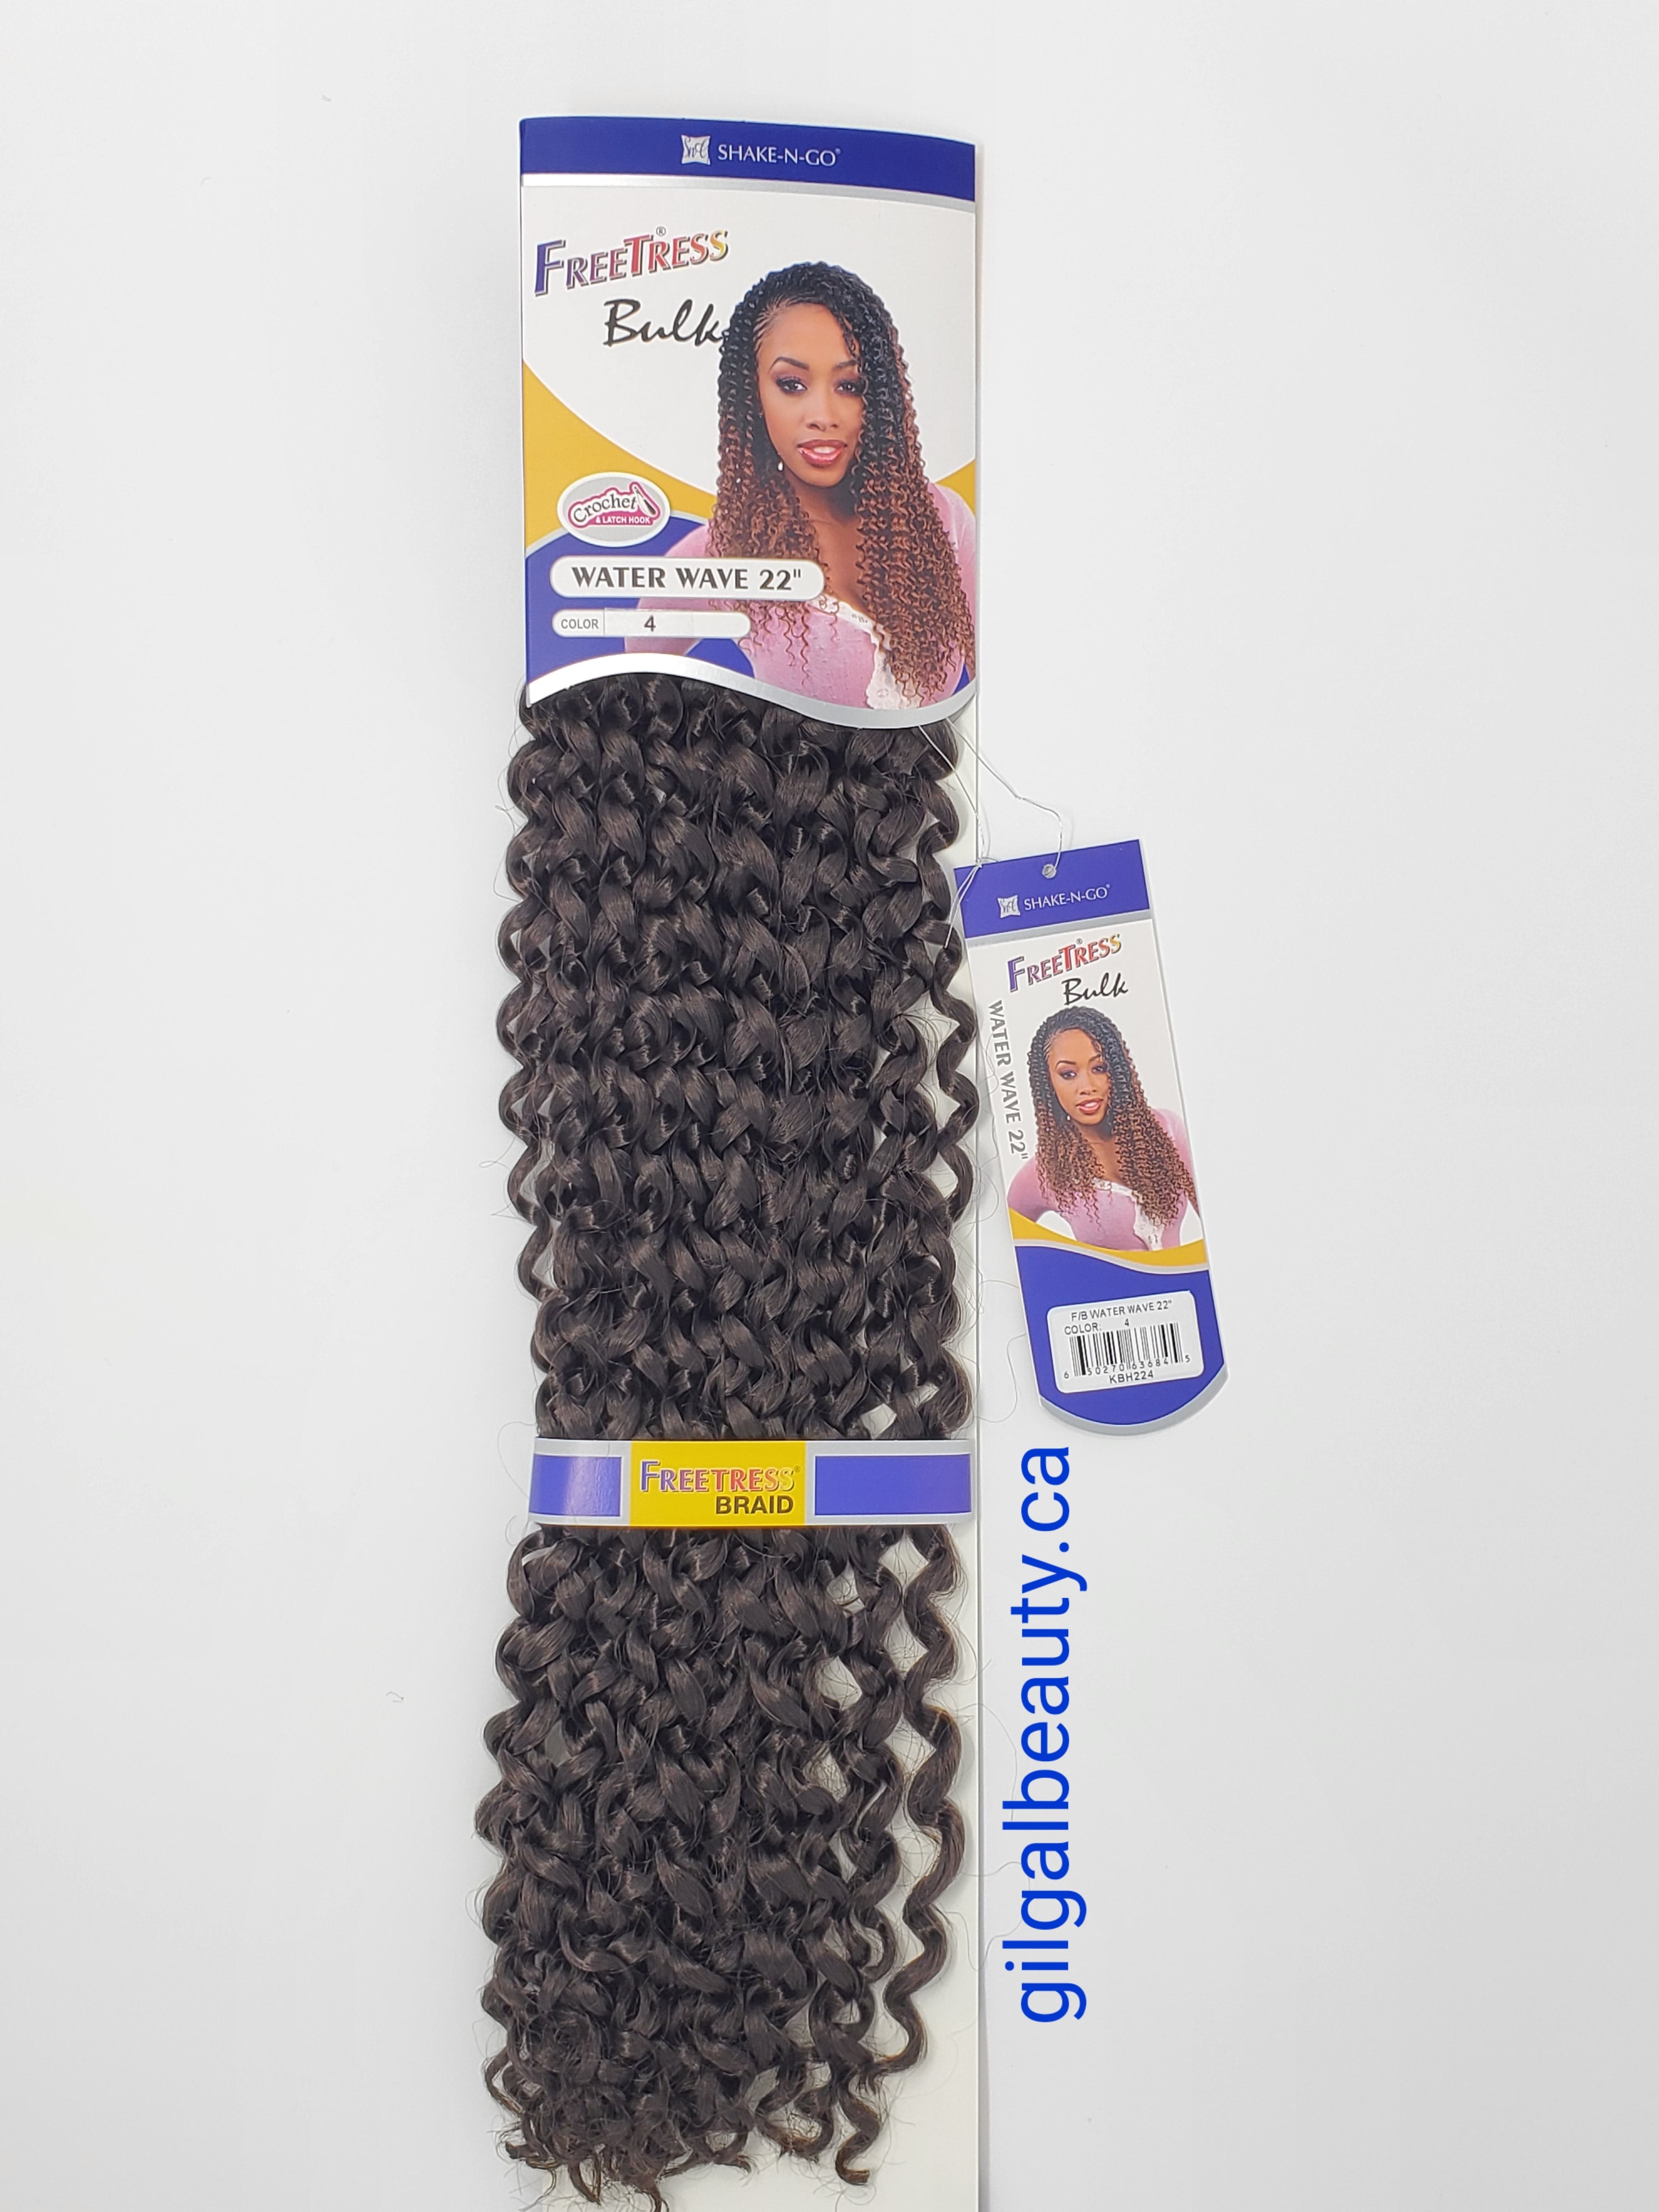 SHAKE-N-GO FREETRESS BRAID - WATER WAVE 22 - Canada wide beauty supply  online store for wigs, braids, weaves, extensions, cosmetics, beauty  applinaces, and beauty cares